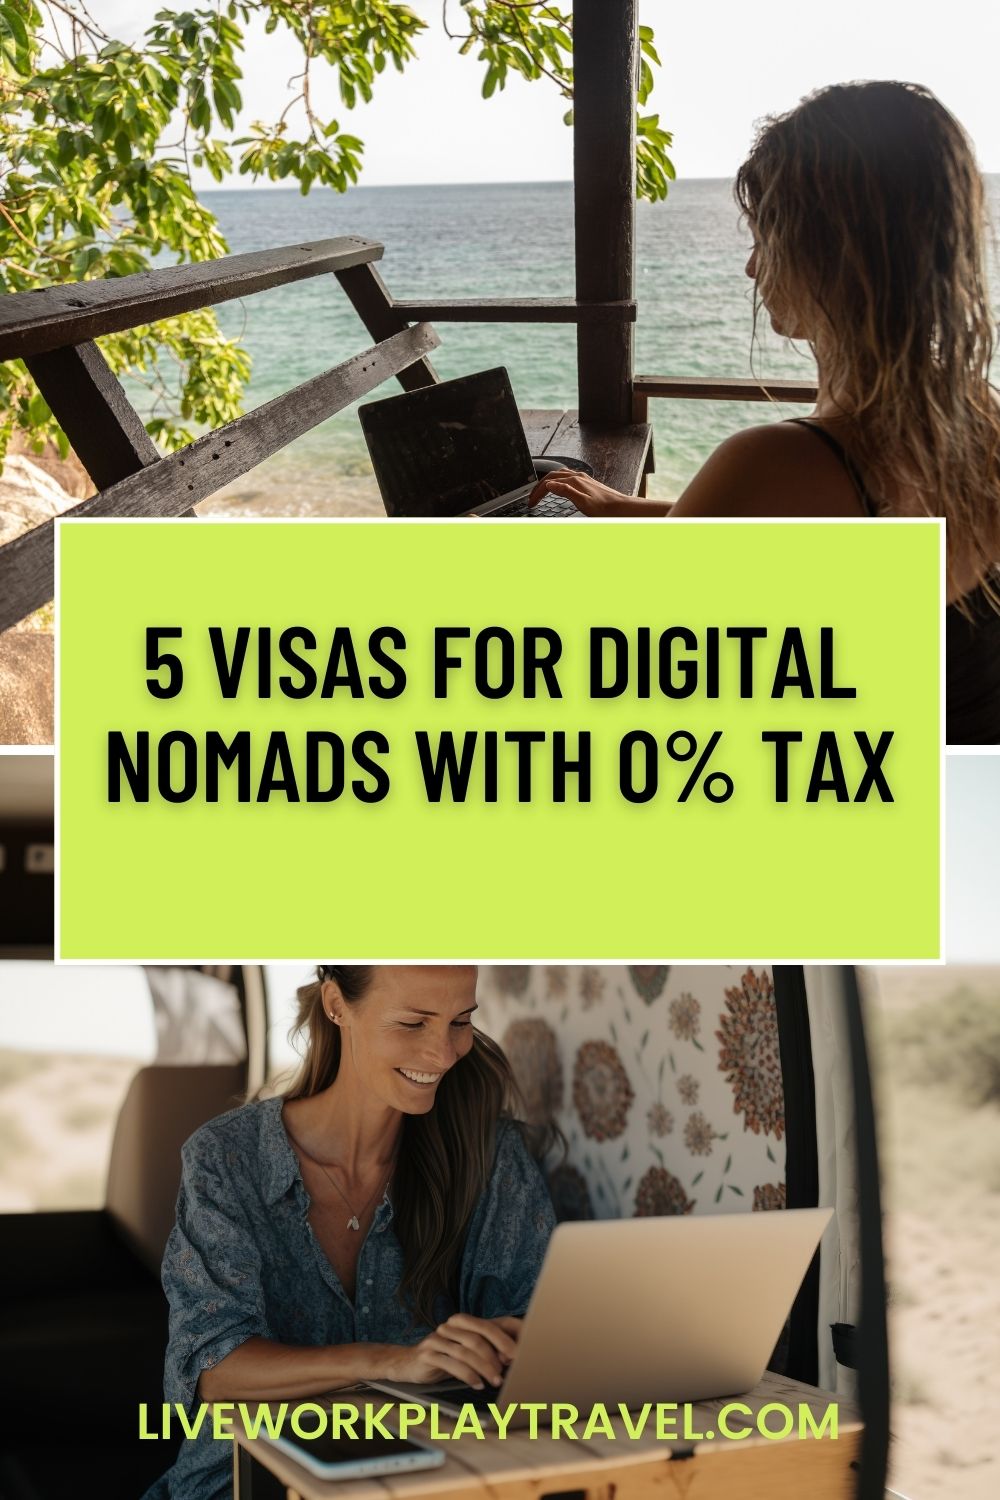 female sitting at beach and female sitting in a van being digital nomads.